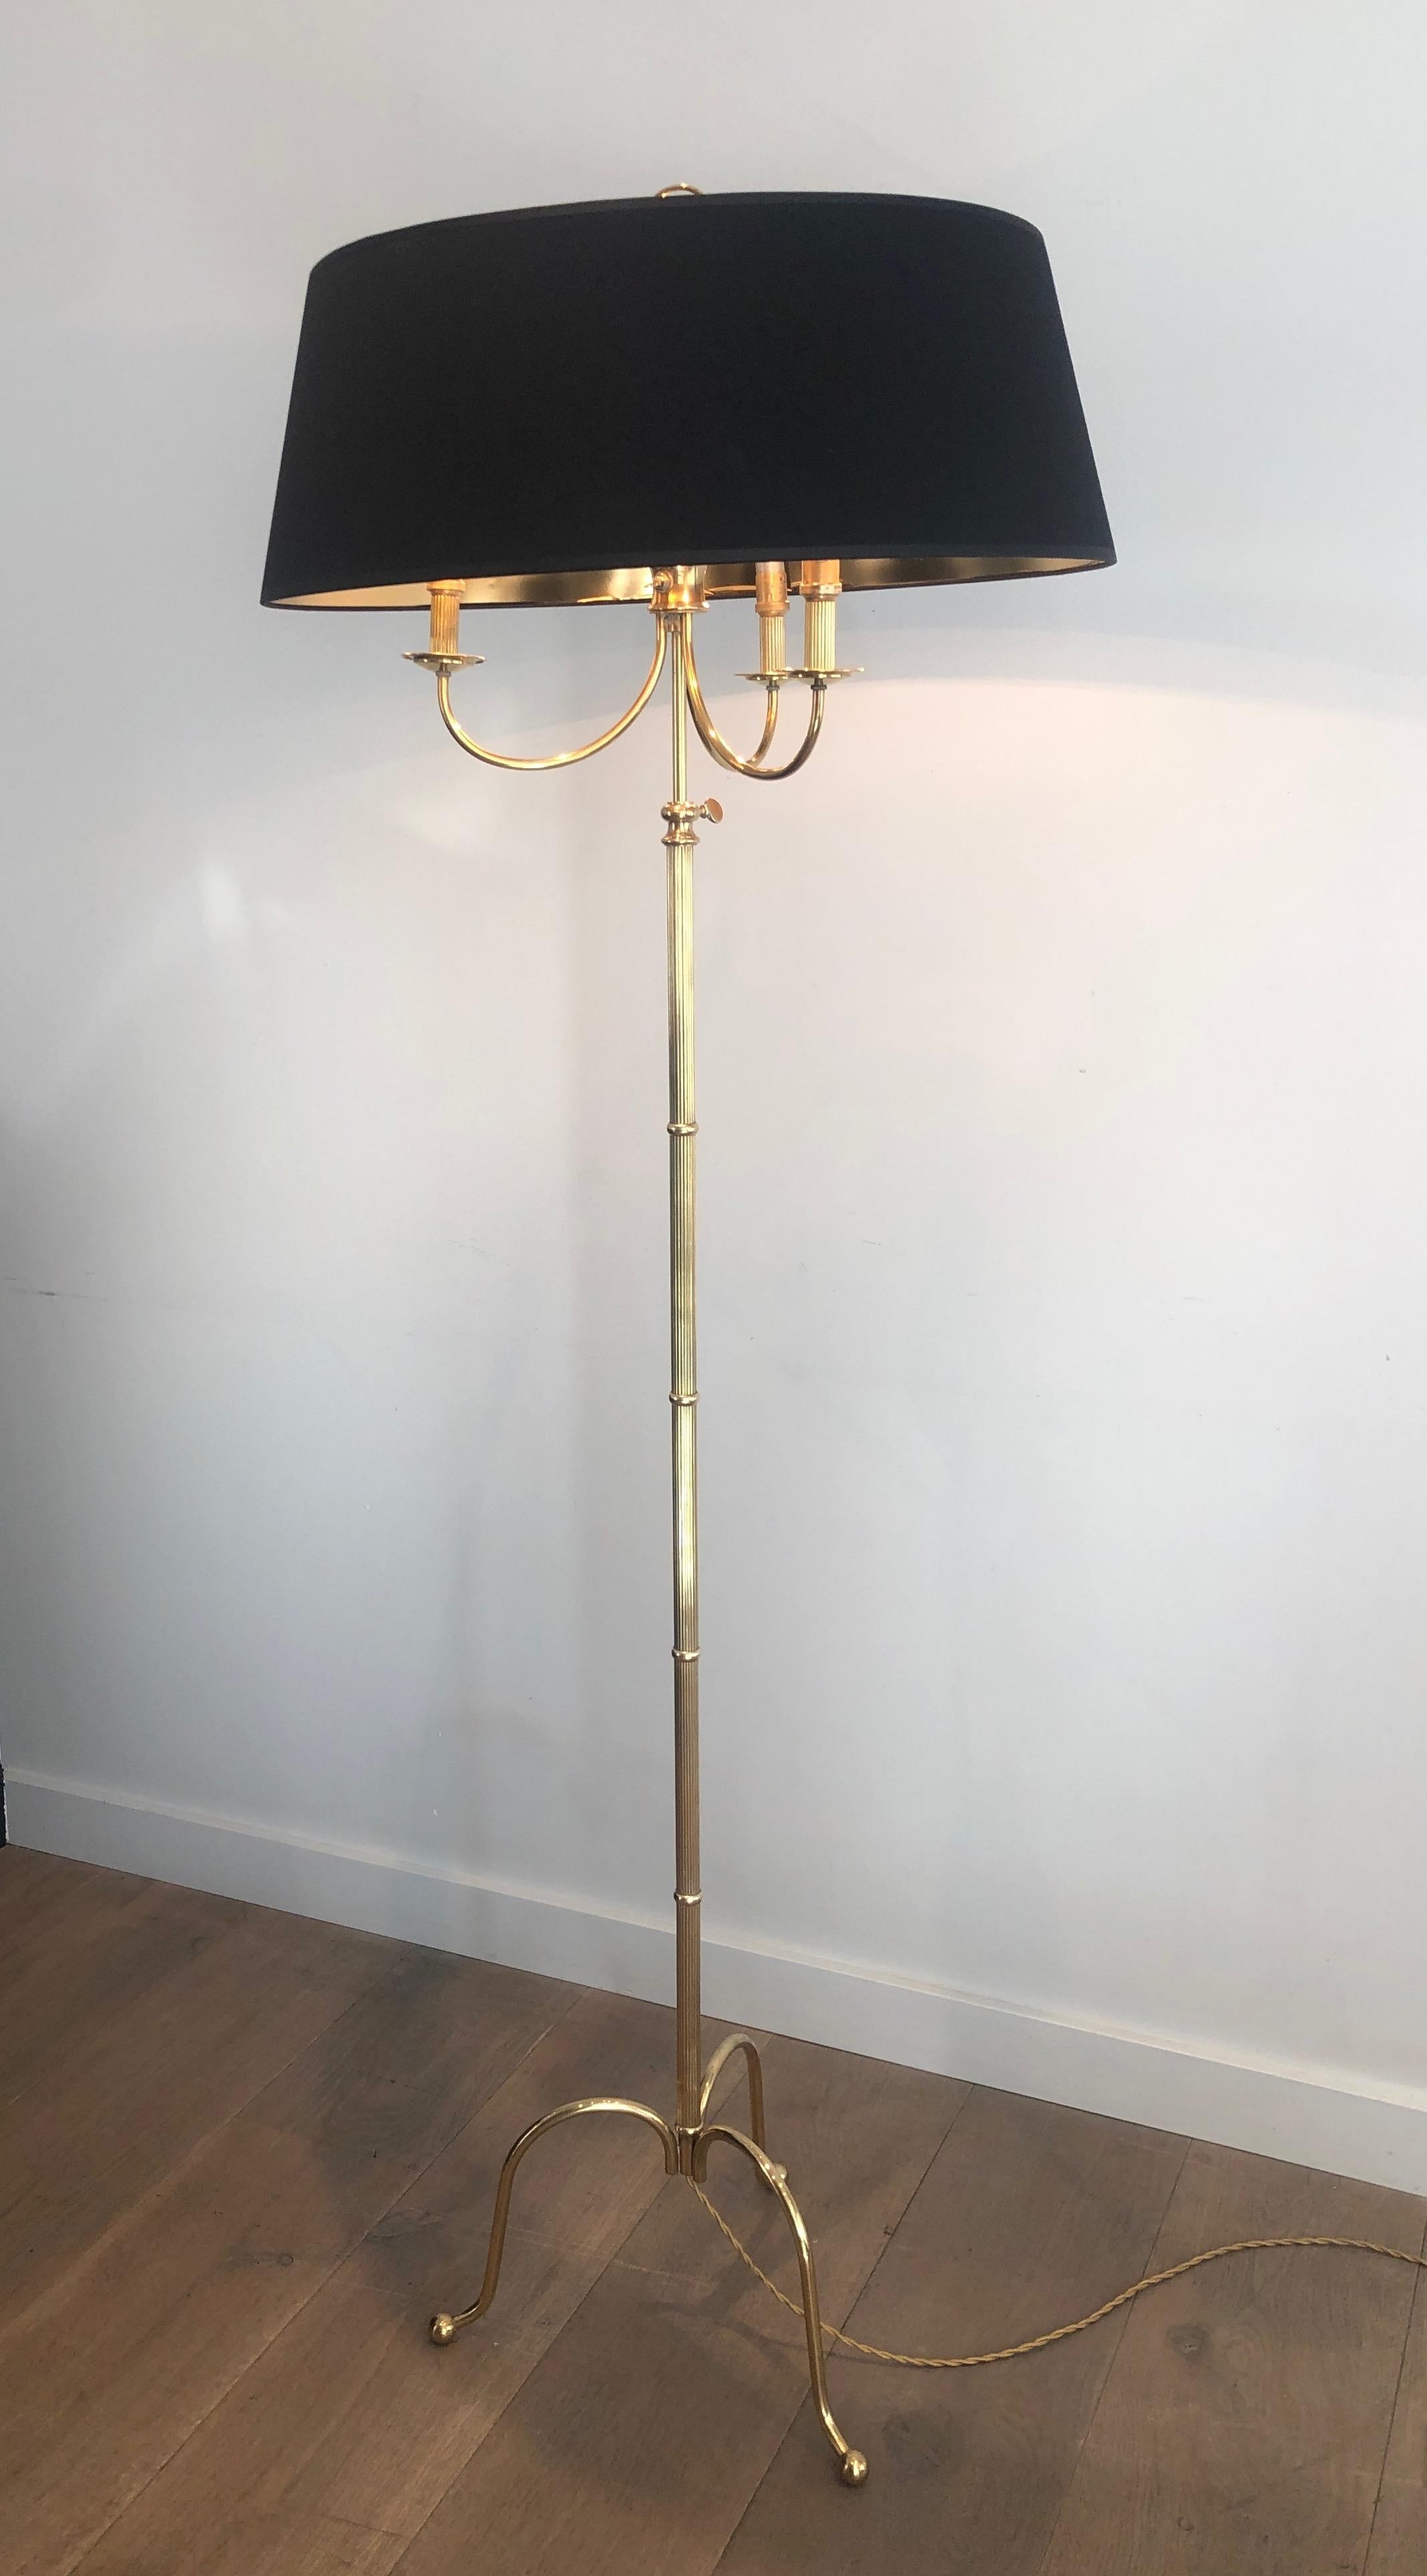 Tripode Brass Floor Lamp with 3 Arms, French Work by Maison Jansen For Sale 13